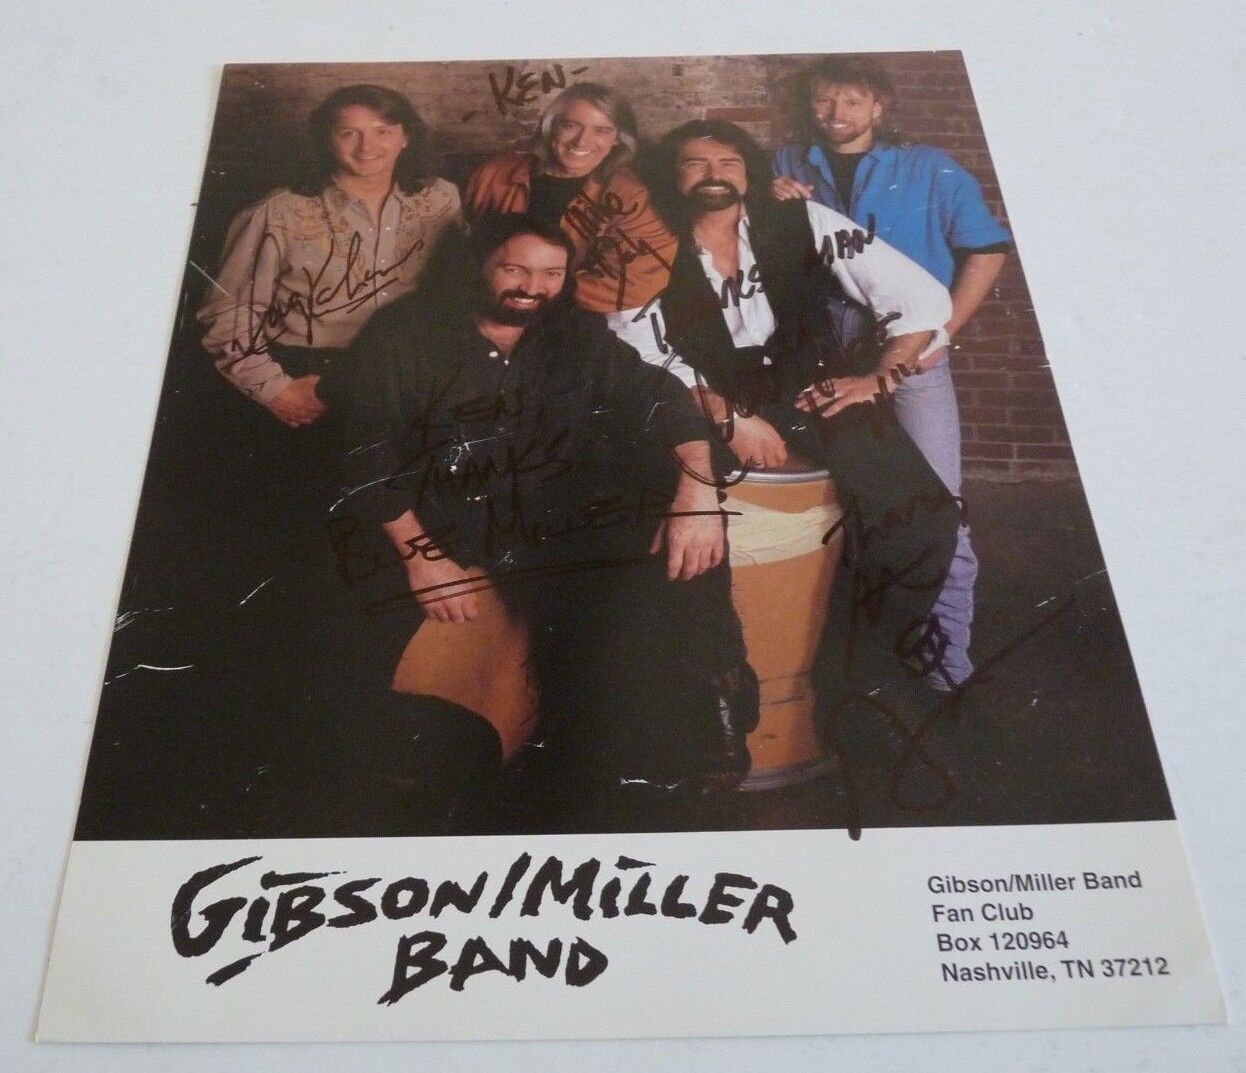 Gibson Miller Band All 5 Signed Autographed 8x10 Photo Poster painting PSA or BAS Guaranteed #2